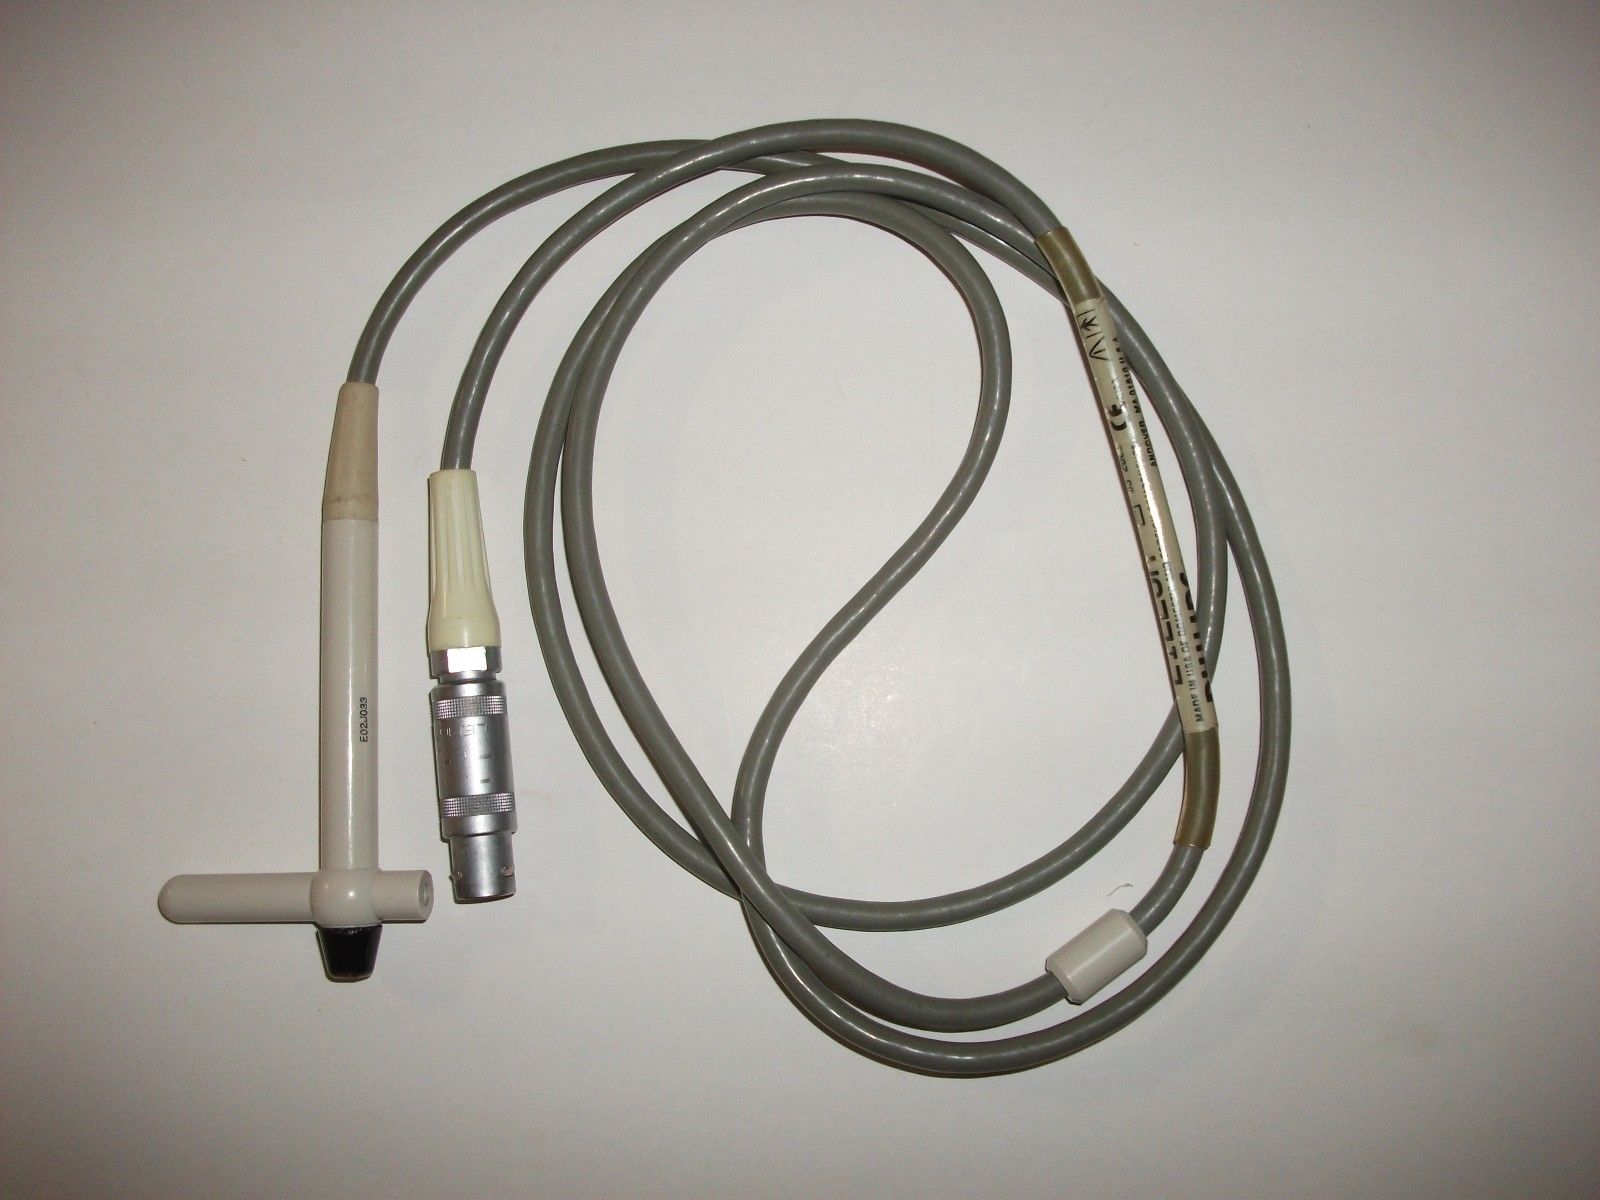 a probe and a cord on a white surface